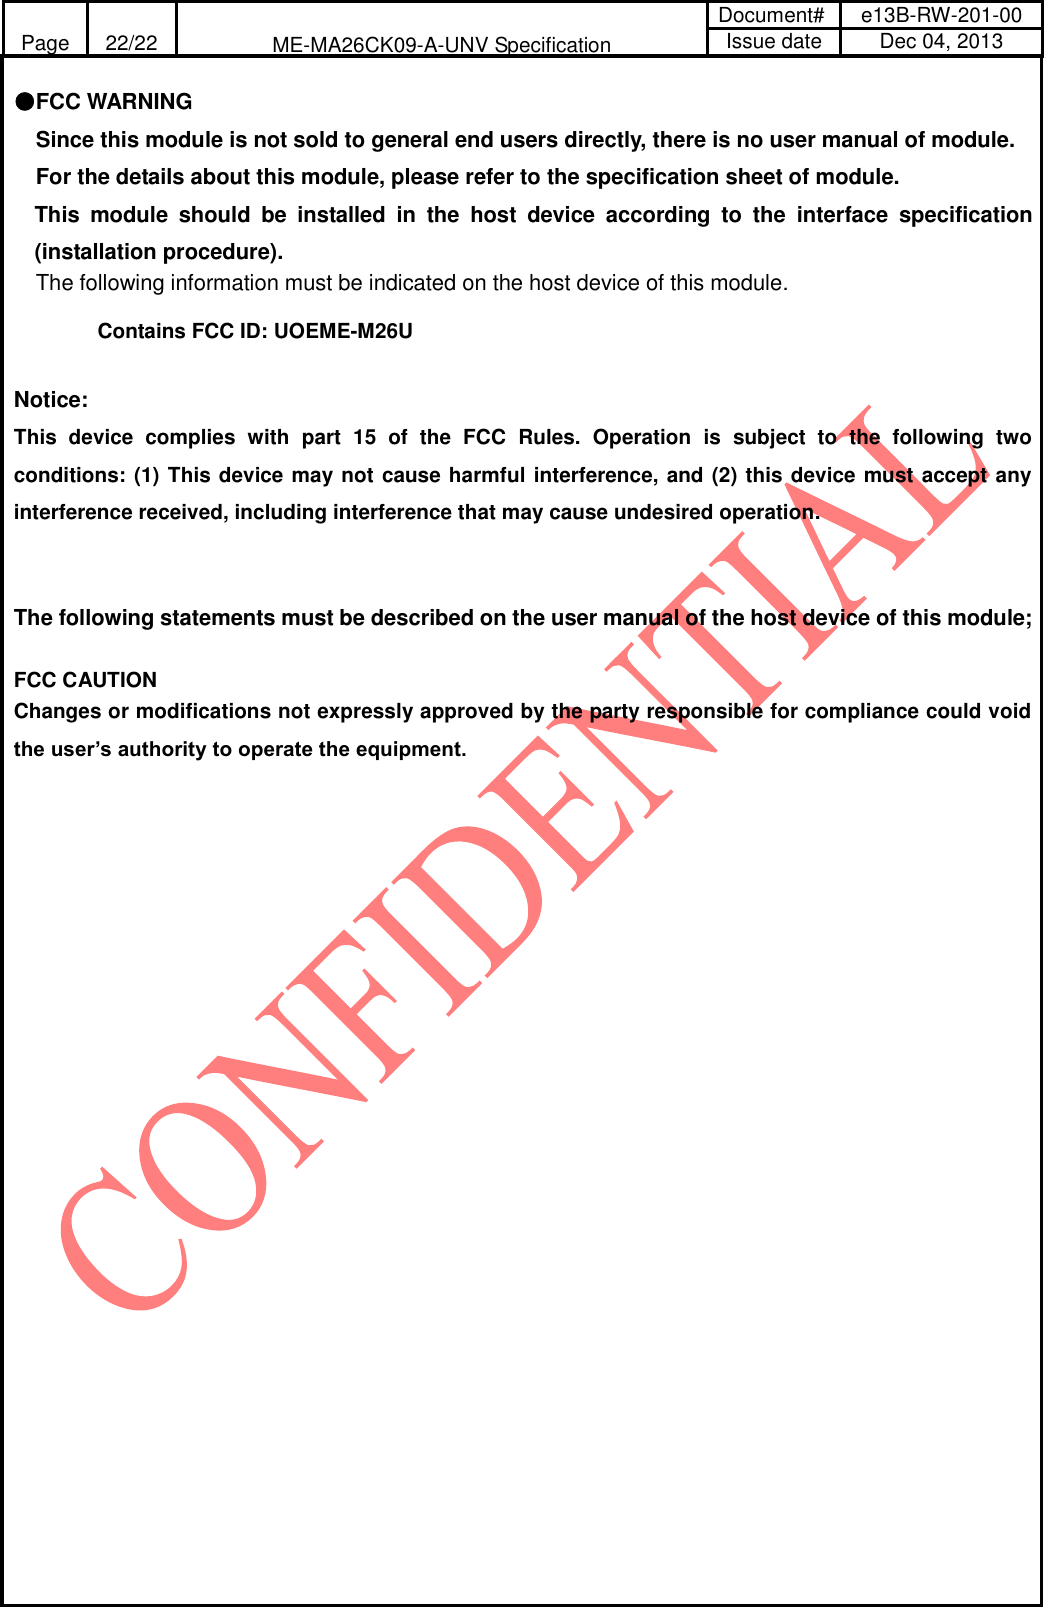 Page 22/22 ME-MA26CK09-A-UNV Specification Document# e13B-RW-201-00 Issue date Dec 04, 2013  ●FCC WARNING Since this module is not sold to general end users directly, there is no user manual of module. For the details about this module, please refer to the specification sheet of module.    This  module  should  be  installed  in  the  host  device  according  to  the  interface  specification (installation procedure).   The following information must be indicated on the host device of this module.  Contains FCC ID: UOEME-M26U  Notice: This  device  complies  with  part  15  of  the  FCC  Rules.  Operation  is  subject  to  the  following  two conditions: (1) This device may not cause harmful interference, and (2) this device must accept any interference received, including interference that may cause undesired operation.   The following statements must be described on the user manual of the host device of this module;  FCC CAUTION Changes or modifications not expressly approved by the party responsible for compliance could void the user’s authority to operate the equipment.            